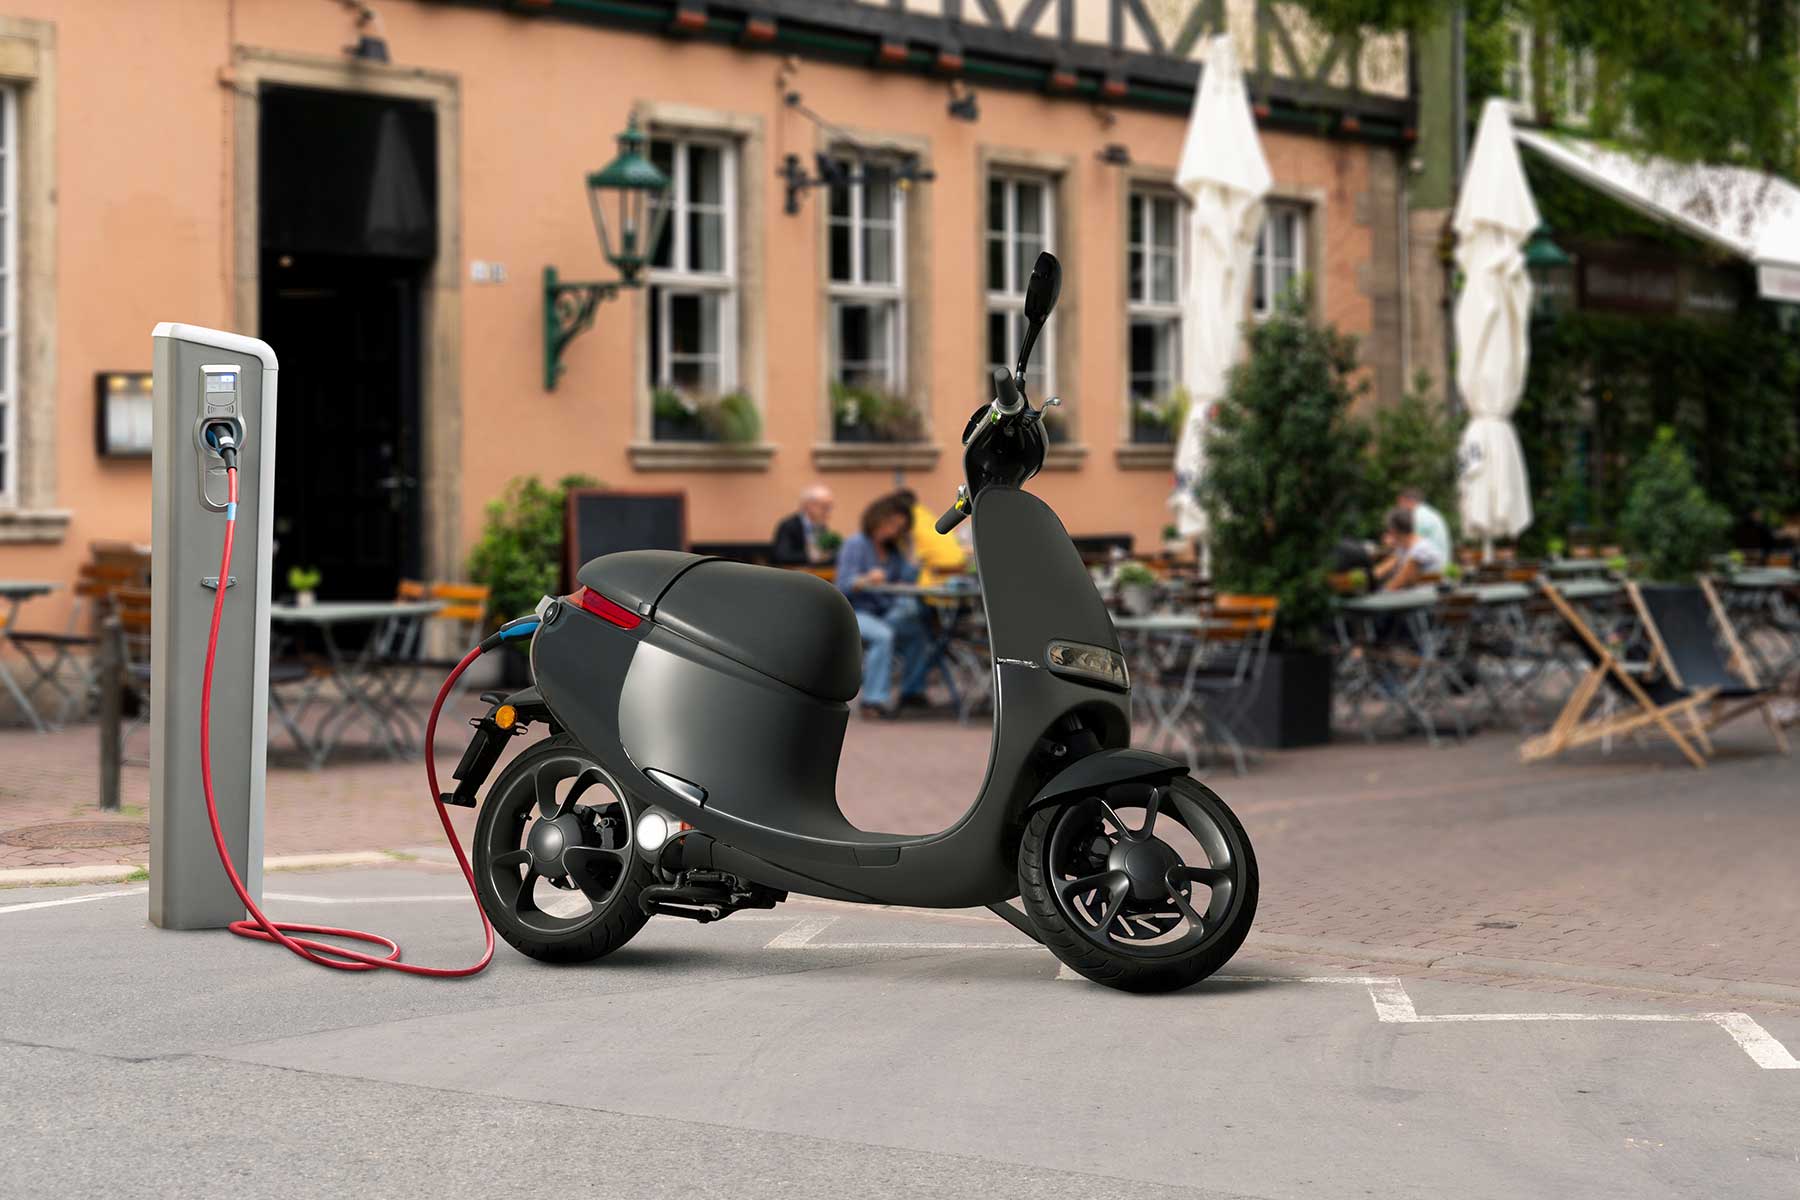 e-Scooter charging on street